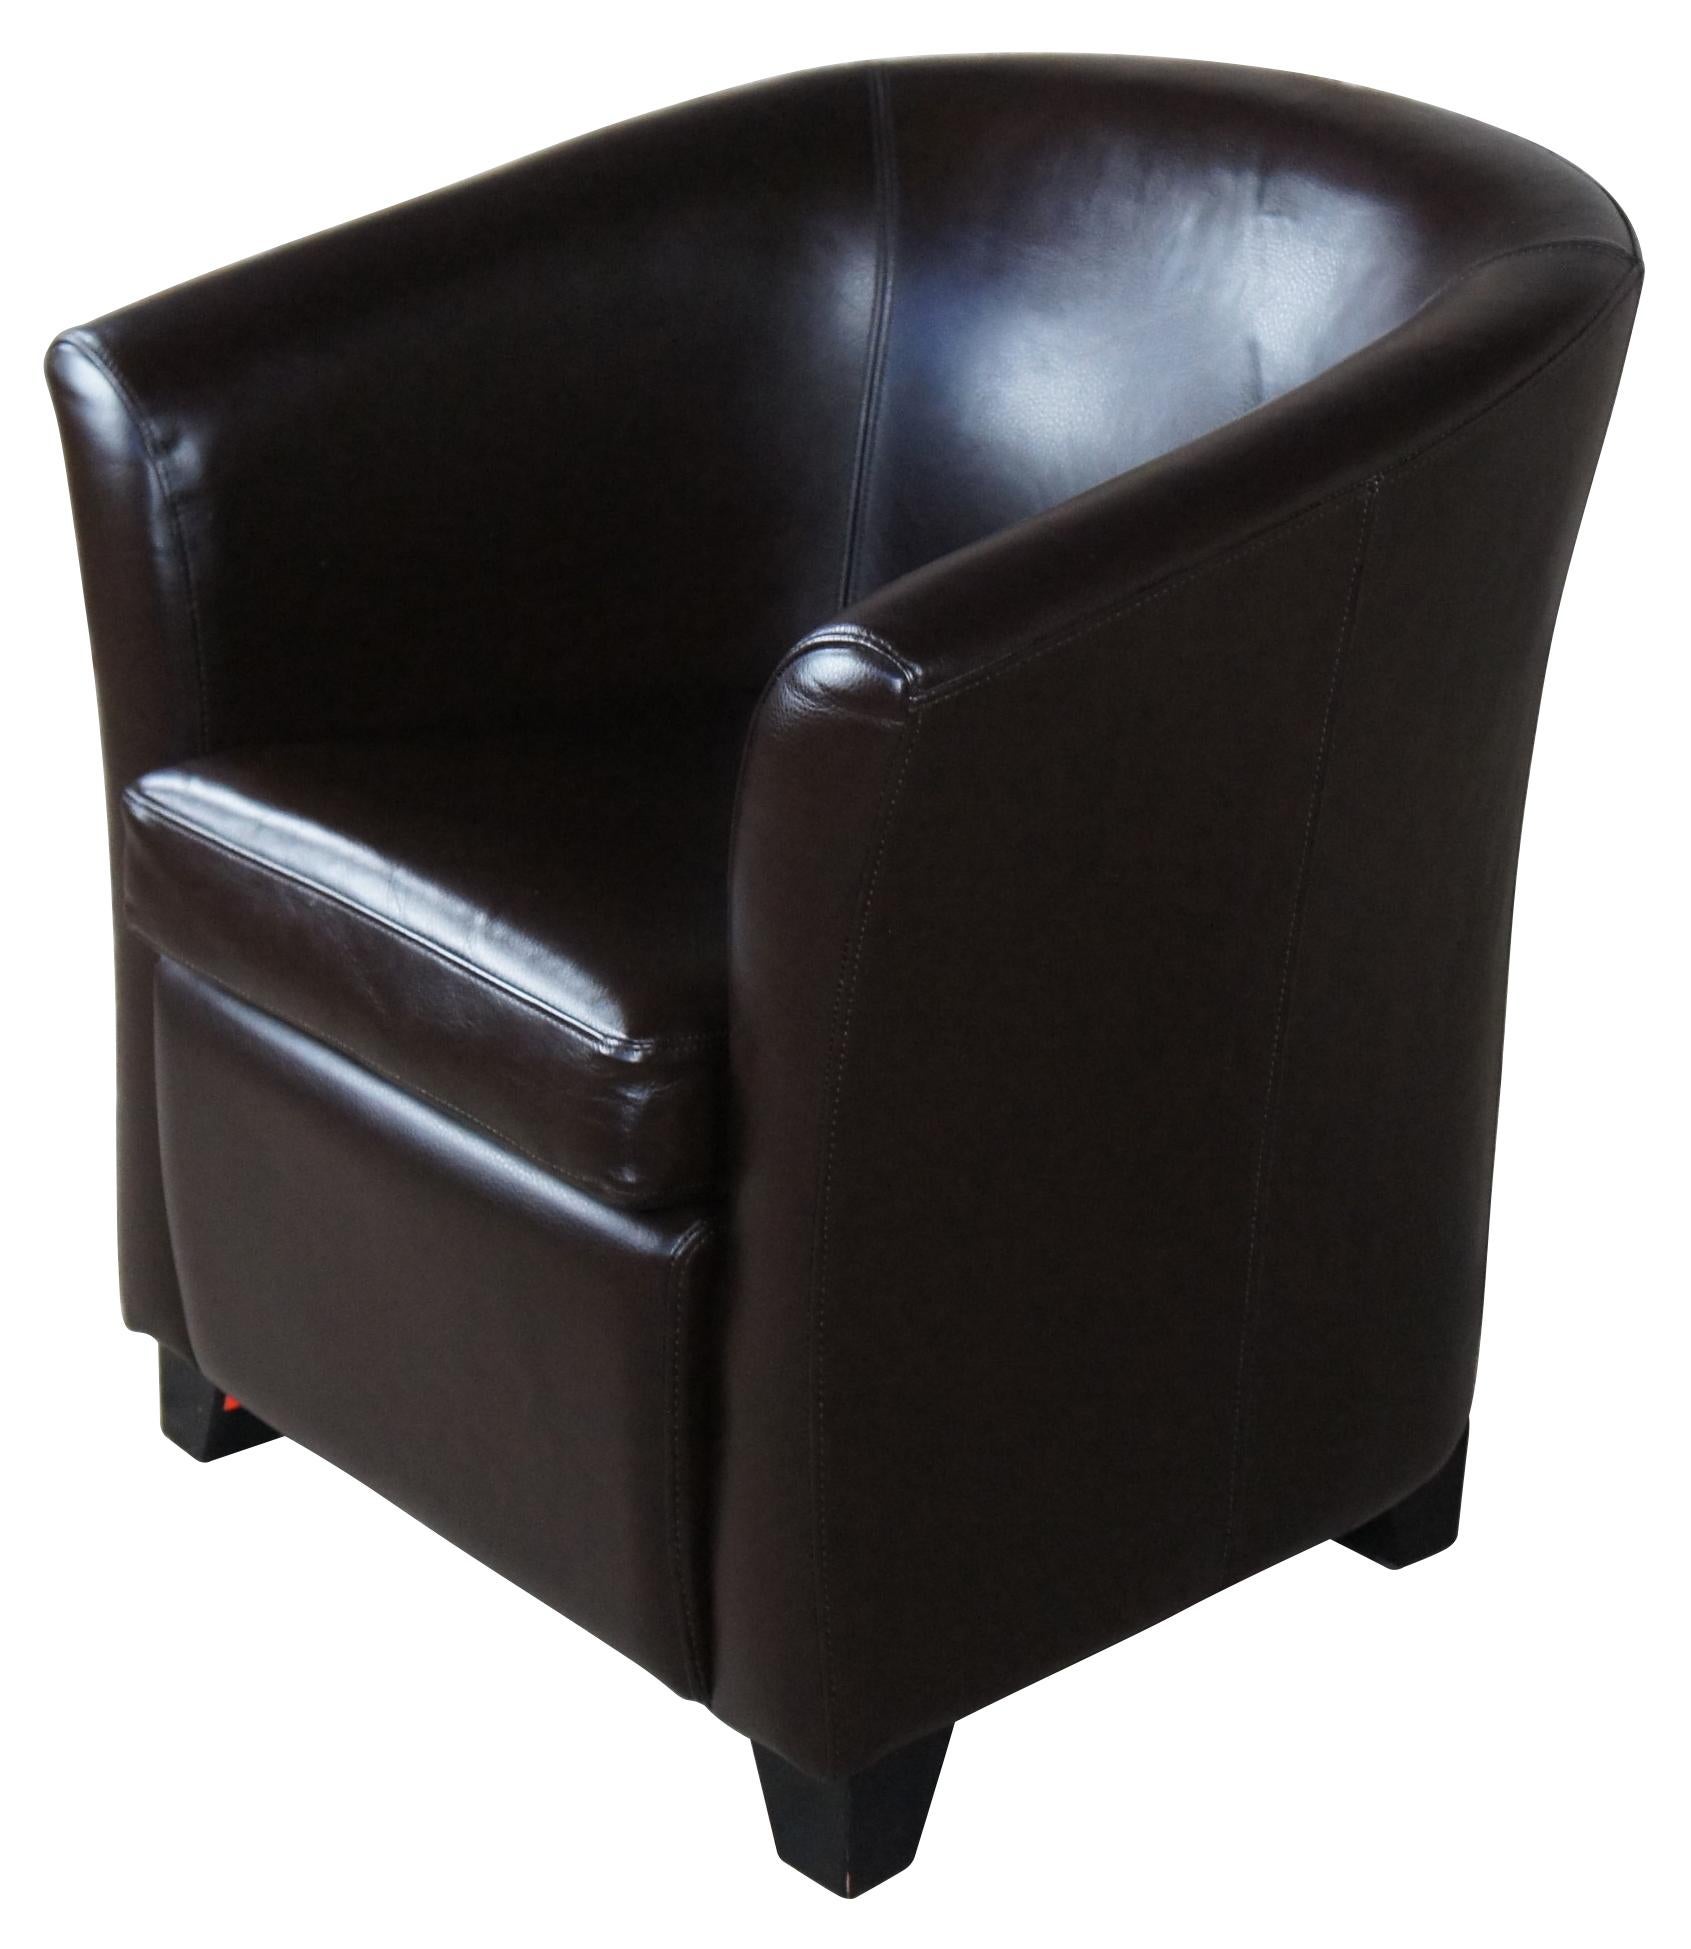 Grandin Road Contemporary barrel back chair has a smooth and sleek look with a curved back leading to flared arms, all covered in an espresso brown leather upholstery. Squared wooden feet add to the contemporary appeal.